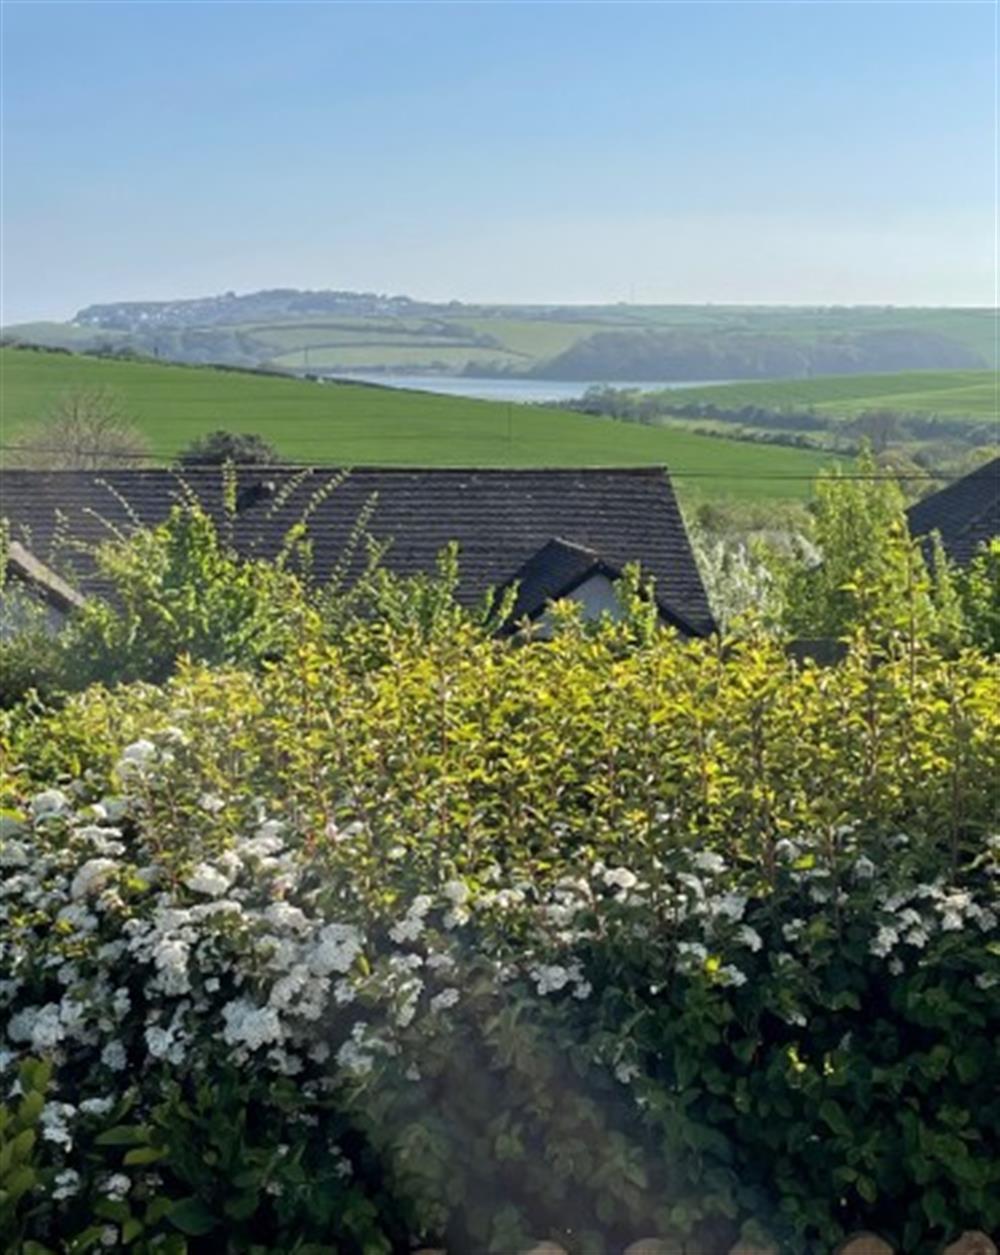 Views across the fields to Salcombe at 1 Lyte Lane in West Charleton